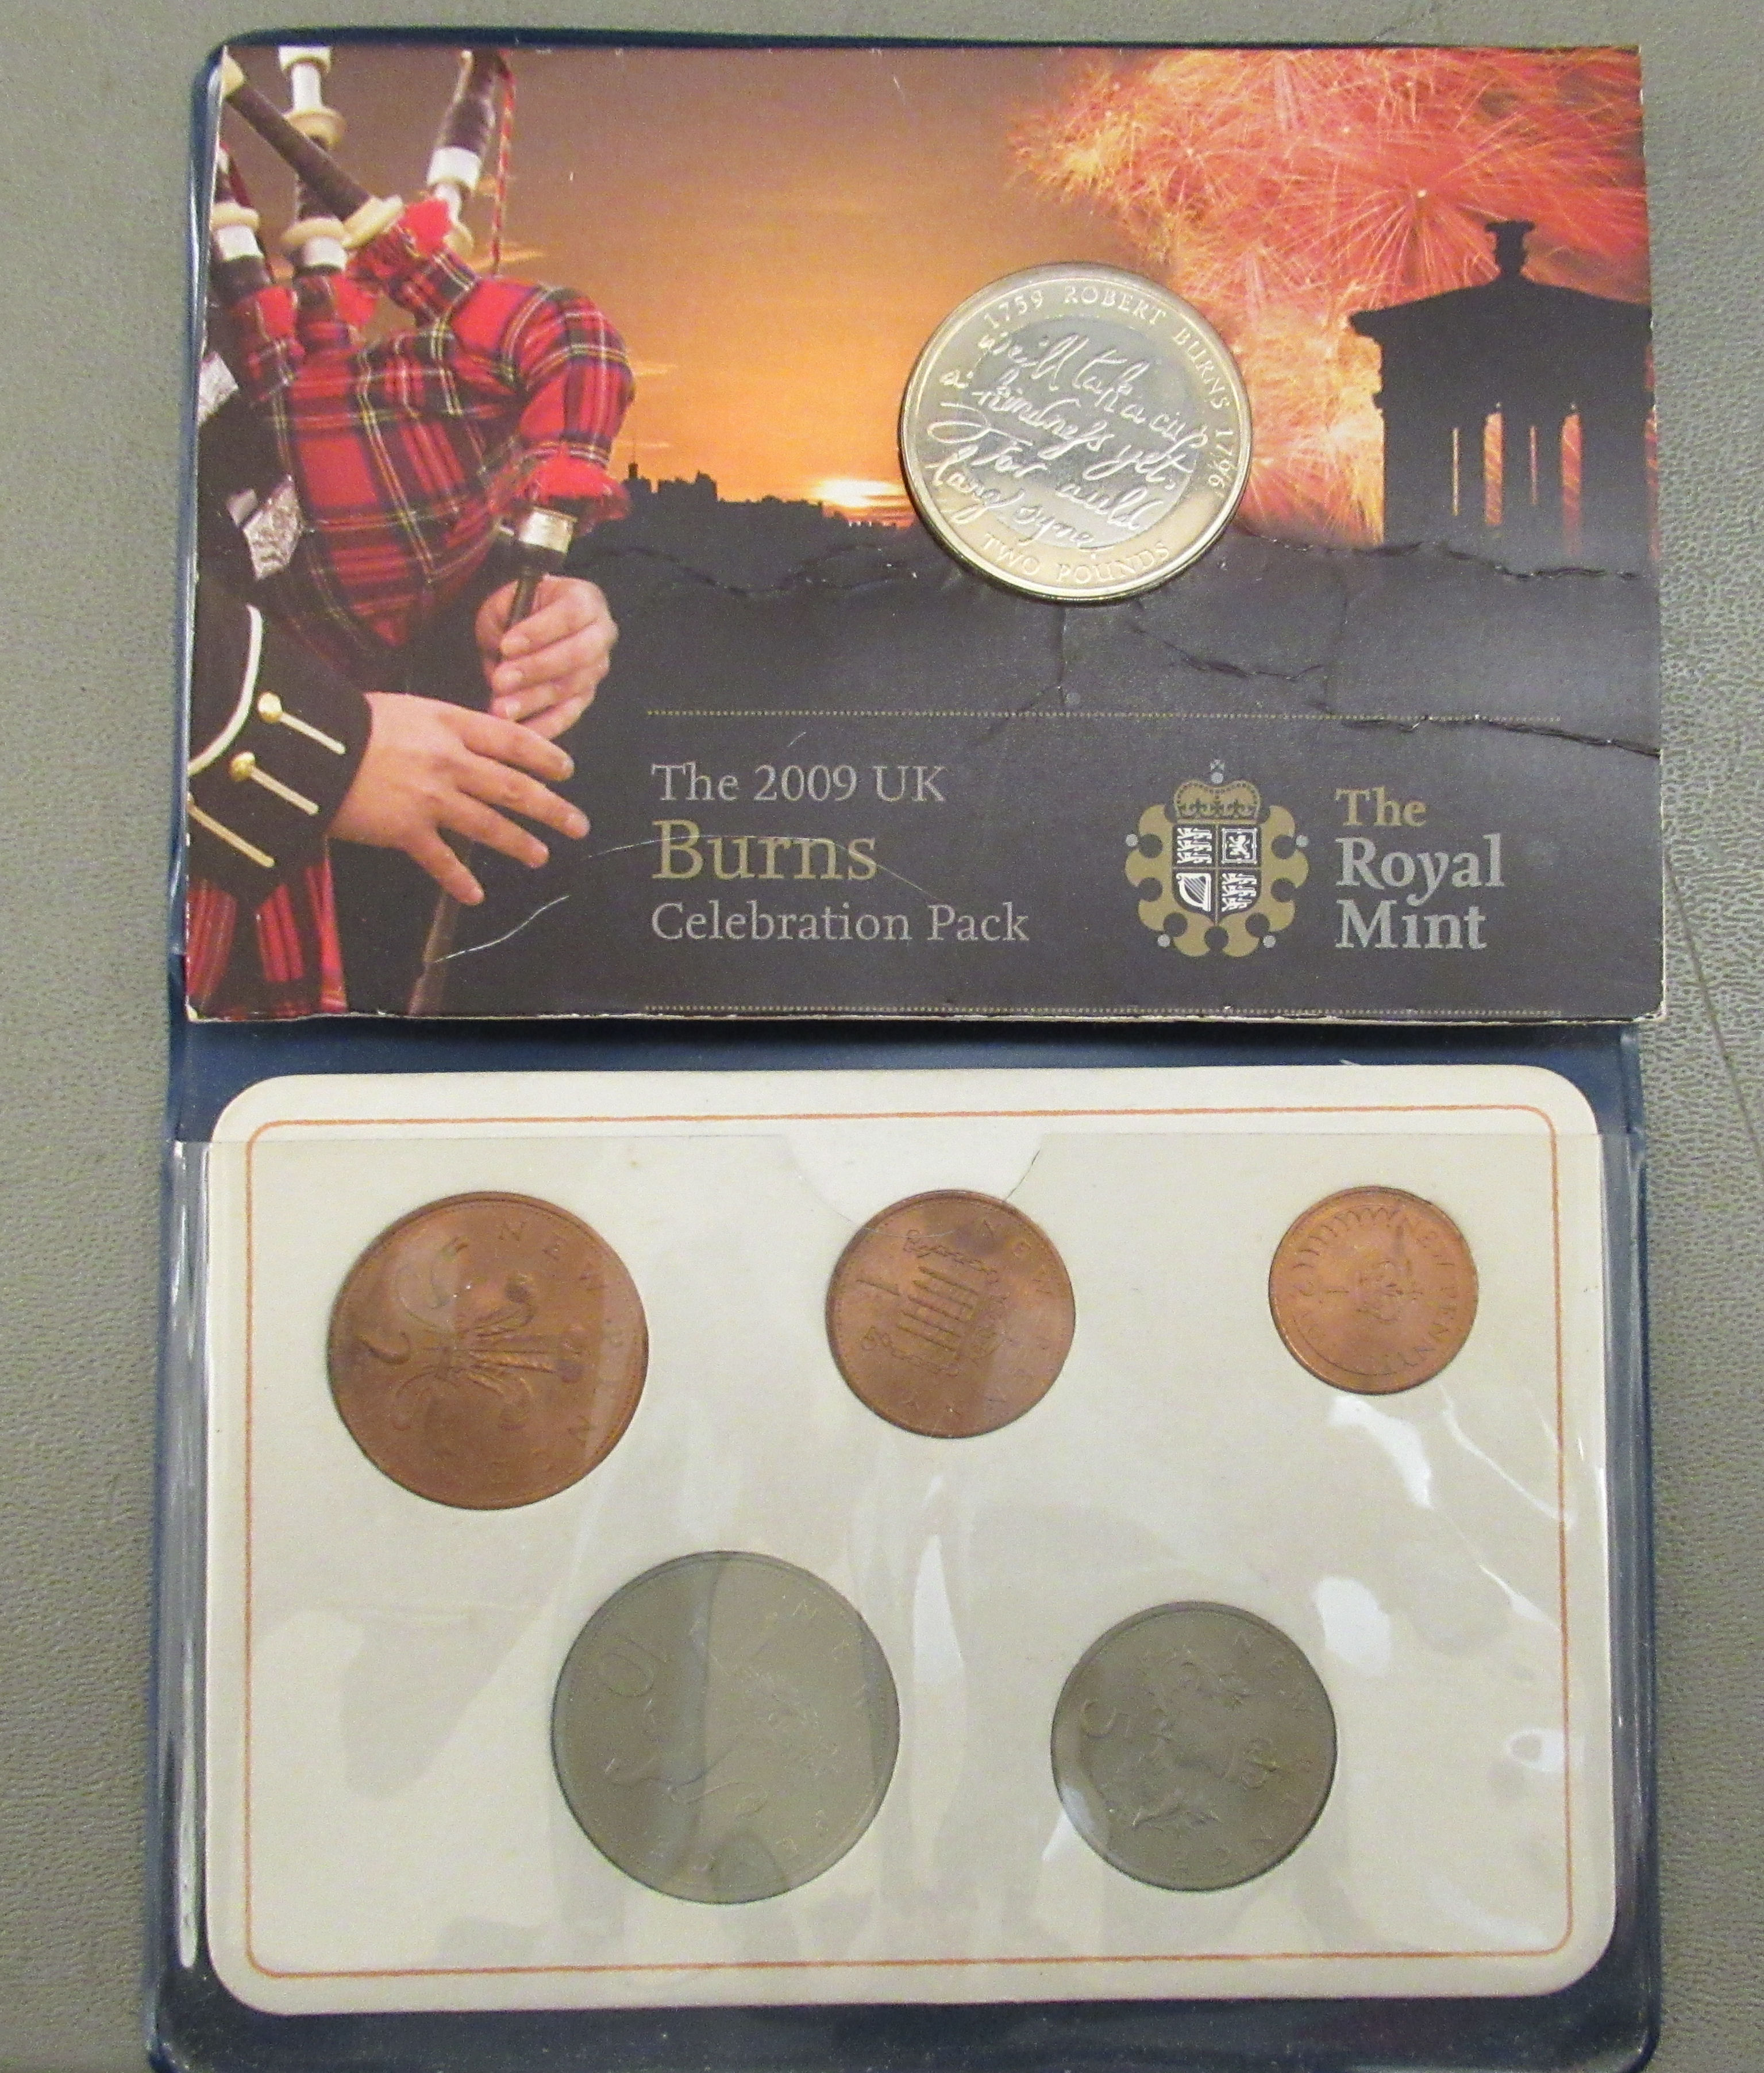 Uncollated collectors coins: to include an Elizabeth II 60th Anniversary £5 - Image 2 of 6